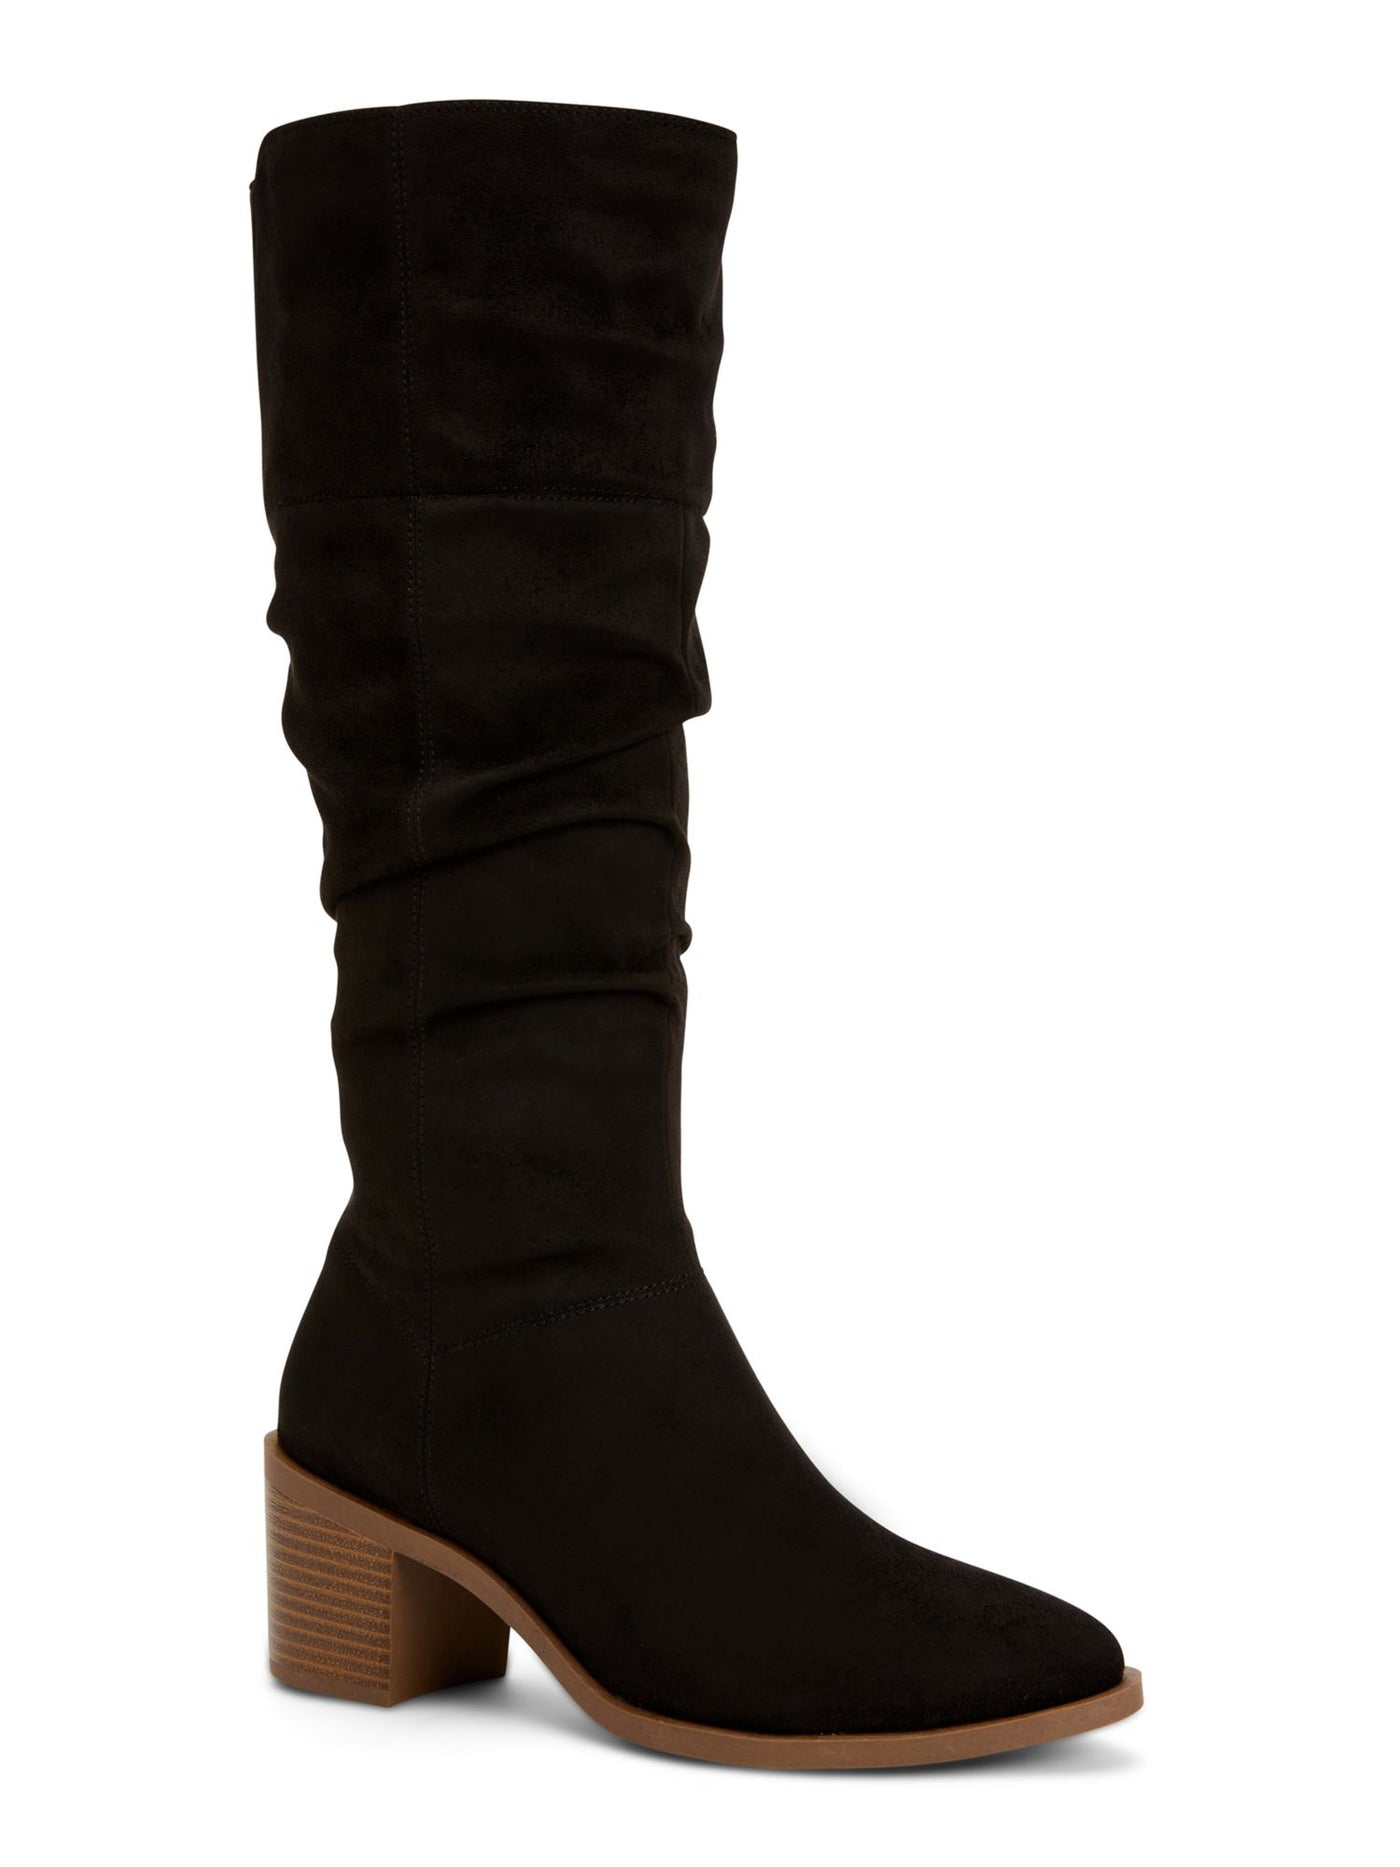 STYLE & COMPANY Womens Black Almond Toe Stacked Heel Zip-Up Dress Boots 10